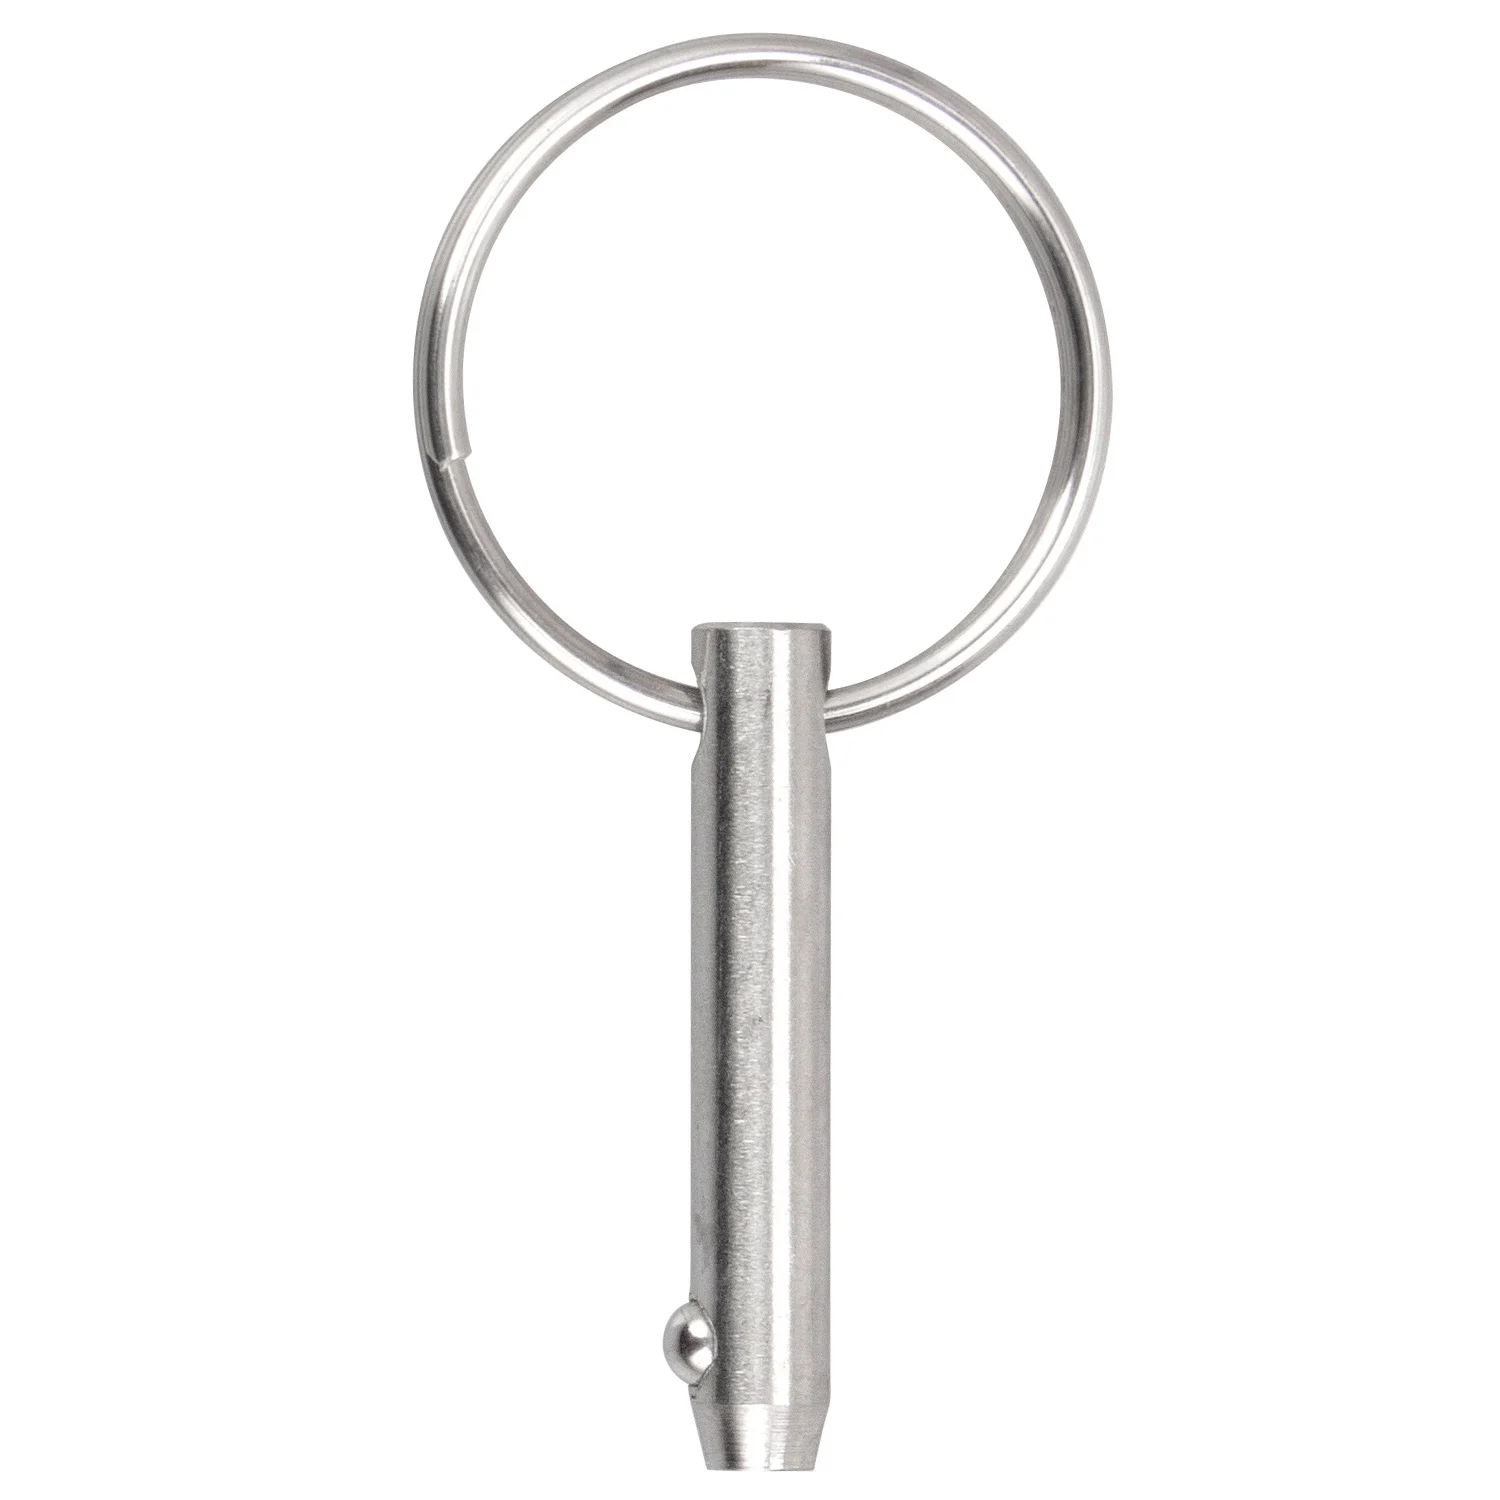 Quick Release Pins 316 Stainless Steel, Bimini Top Pins Diameter 0.25 Inch/6.3mm, Total Length 2 Inch/51mm(Optional 1 or 2) quick release pins bimini top pin diameter 0 25 inch 6 3mm total length 3 74 inch 95mm 316 stainless steel 1 or 2